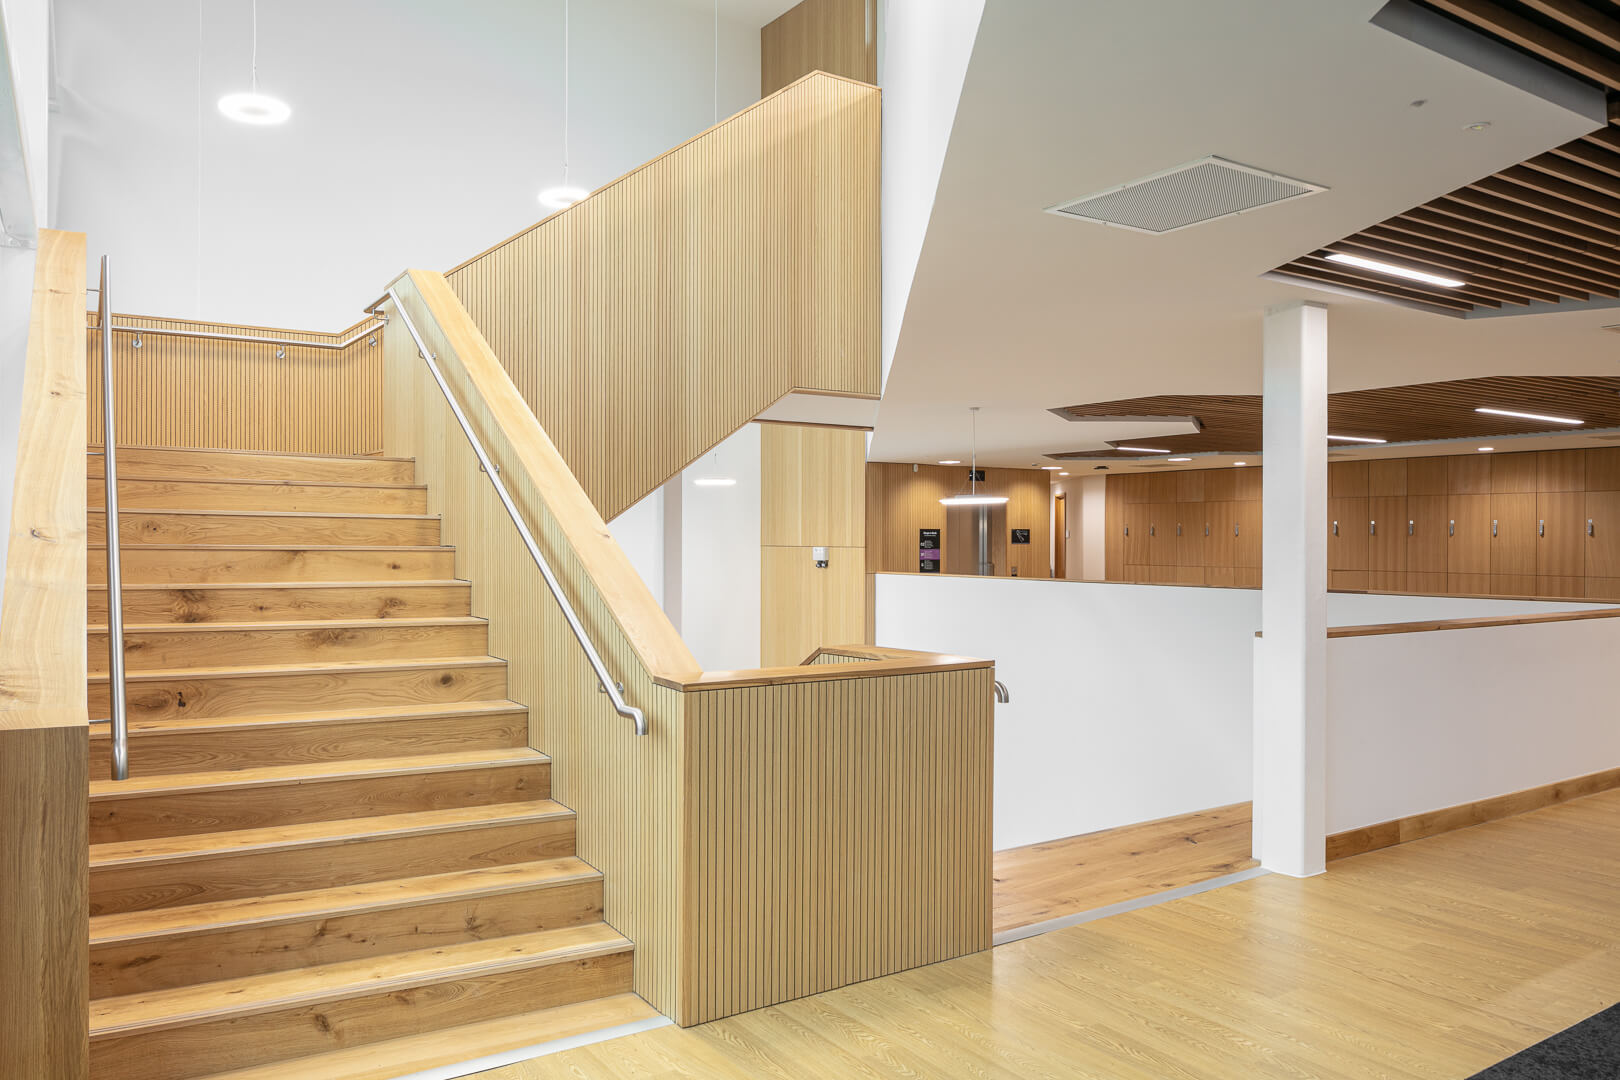 Architectural and interior photography of the newly constructed Harper & Keele Veterinary School, Keele University